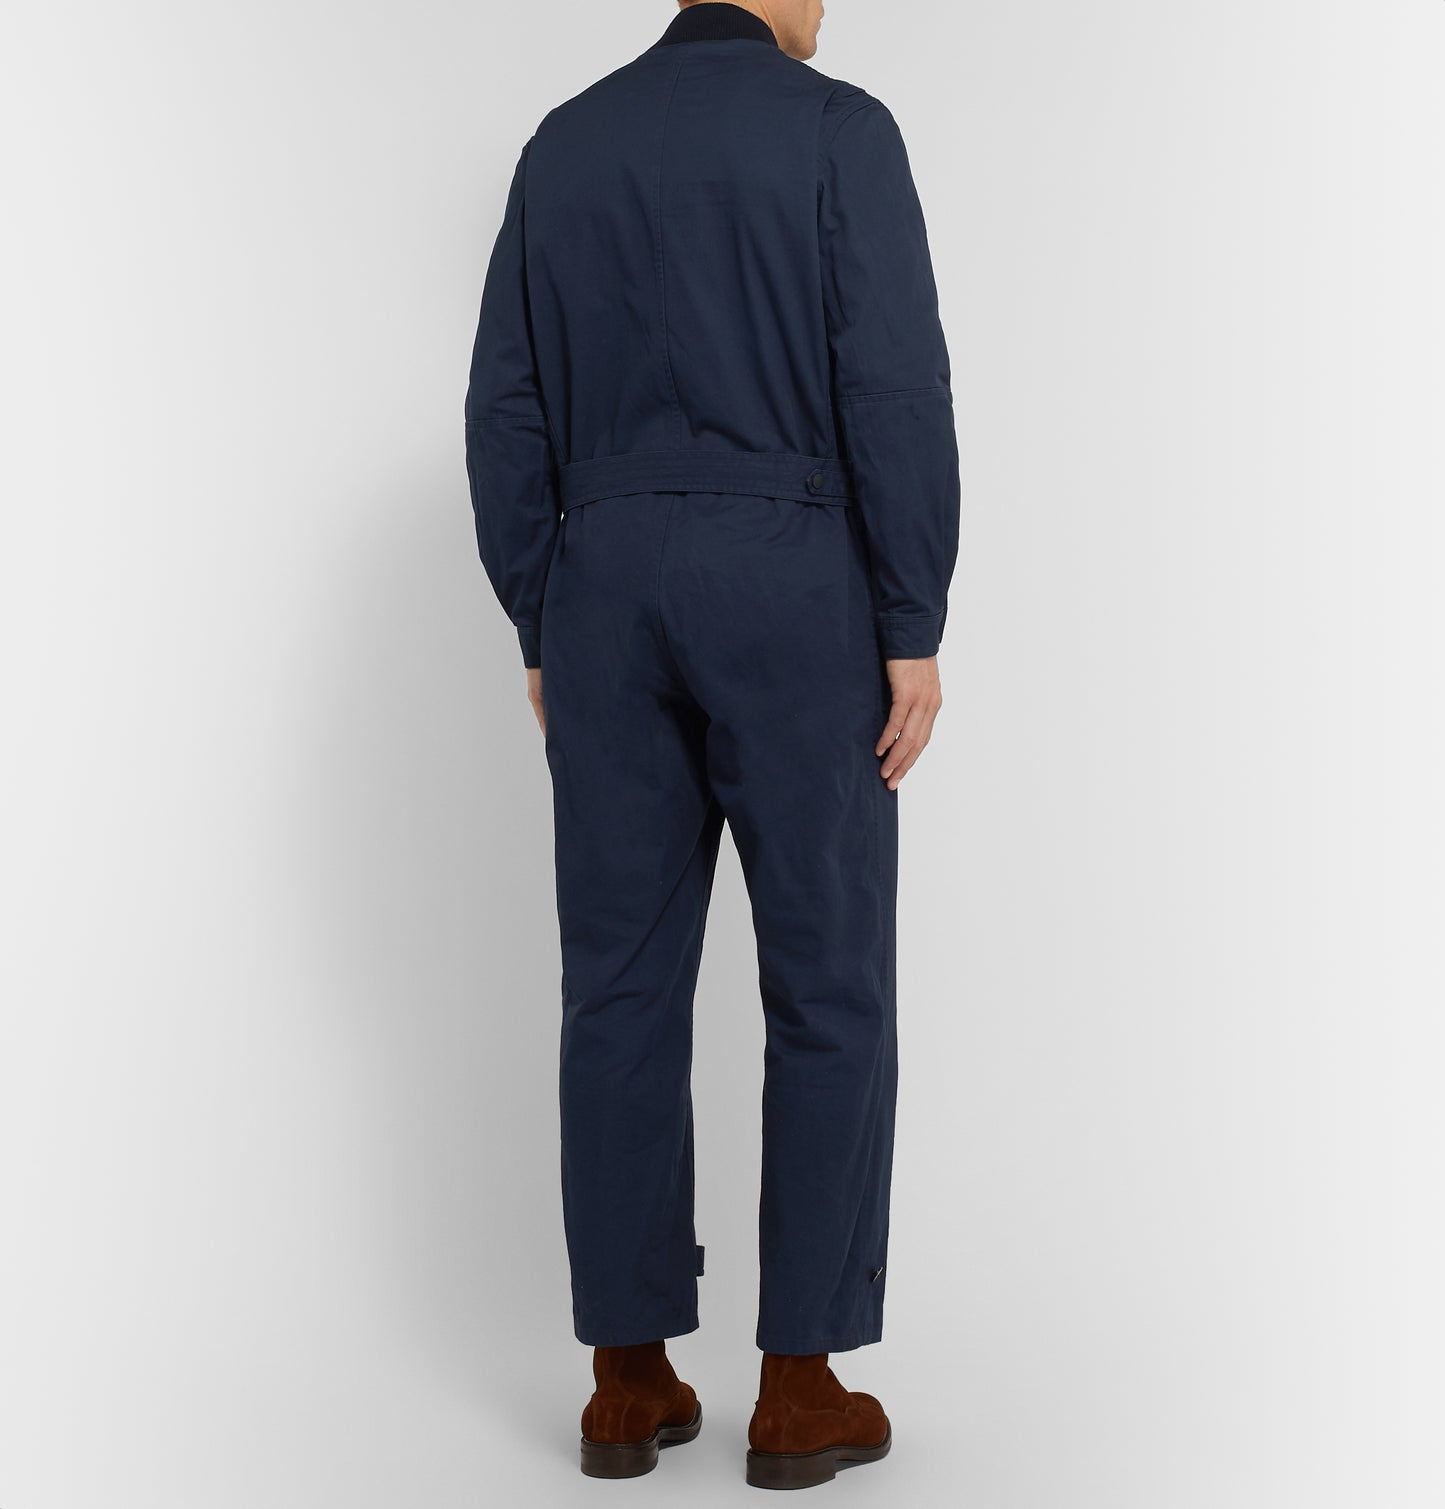 Goodwood Connolly Racing Overalls Navy